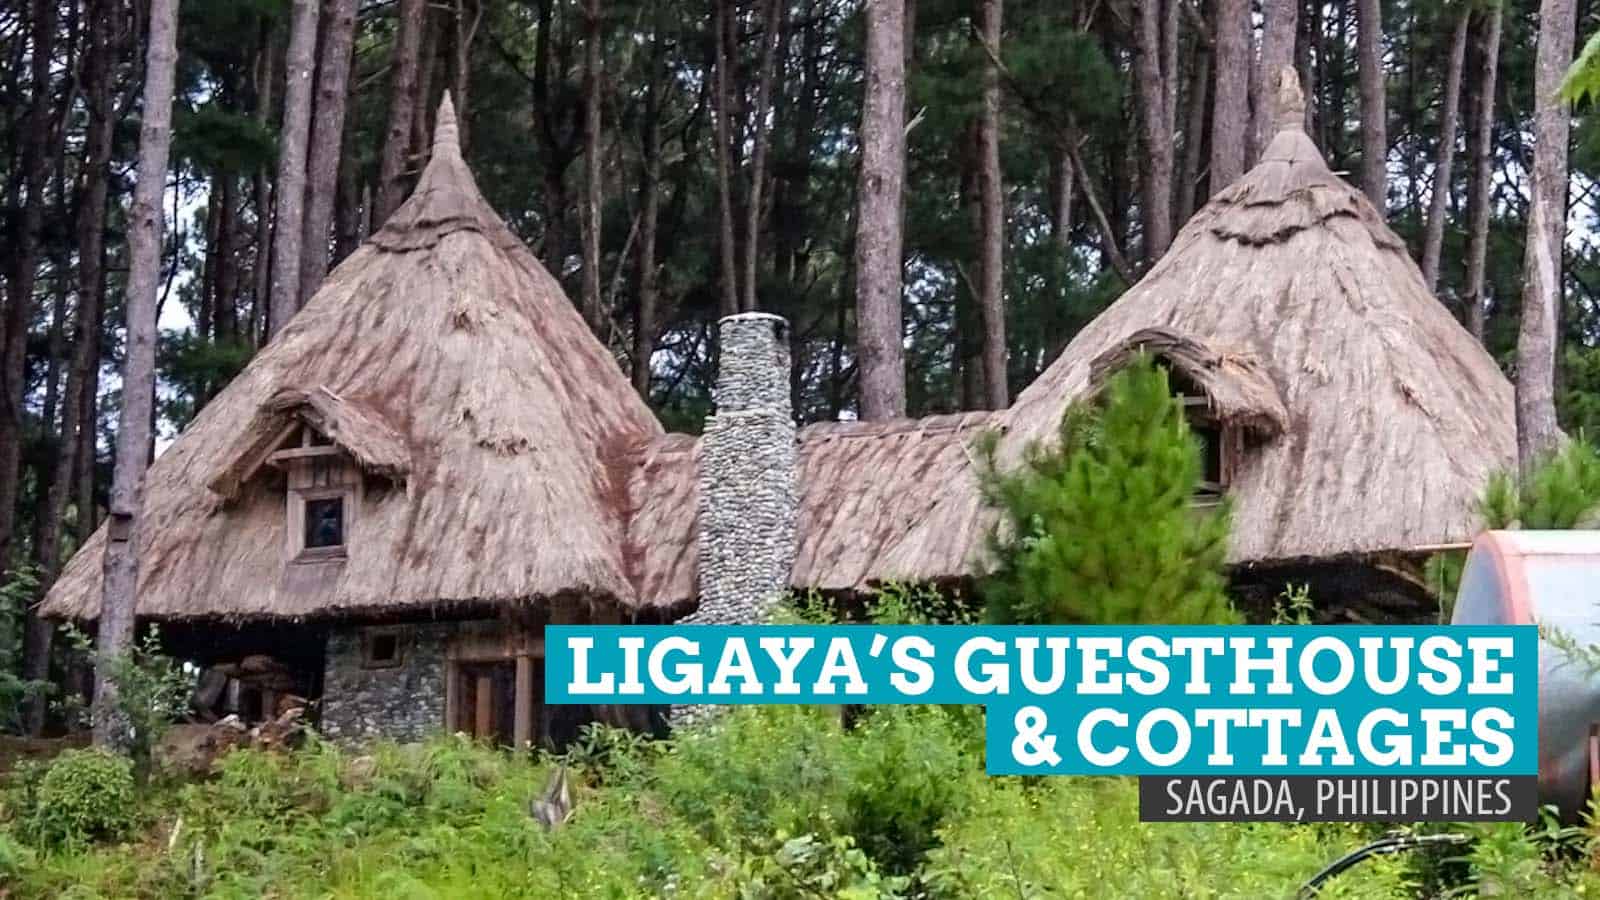 Ligaya’s Guest House and Cottages in Sagada, Philippines